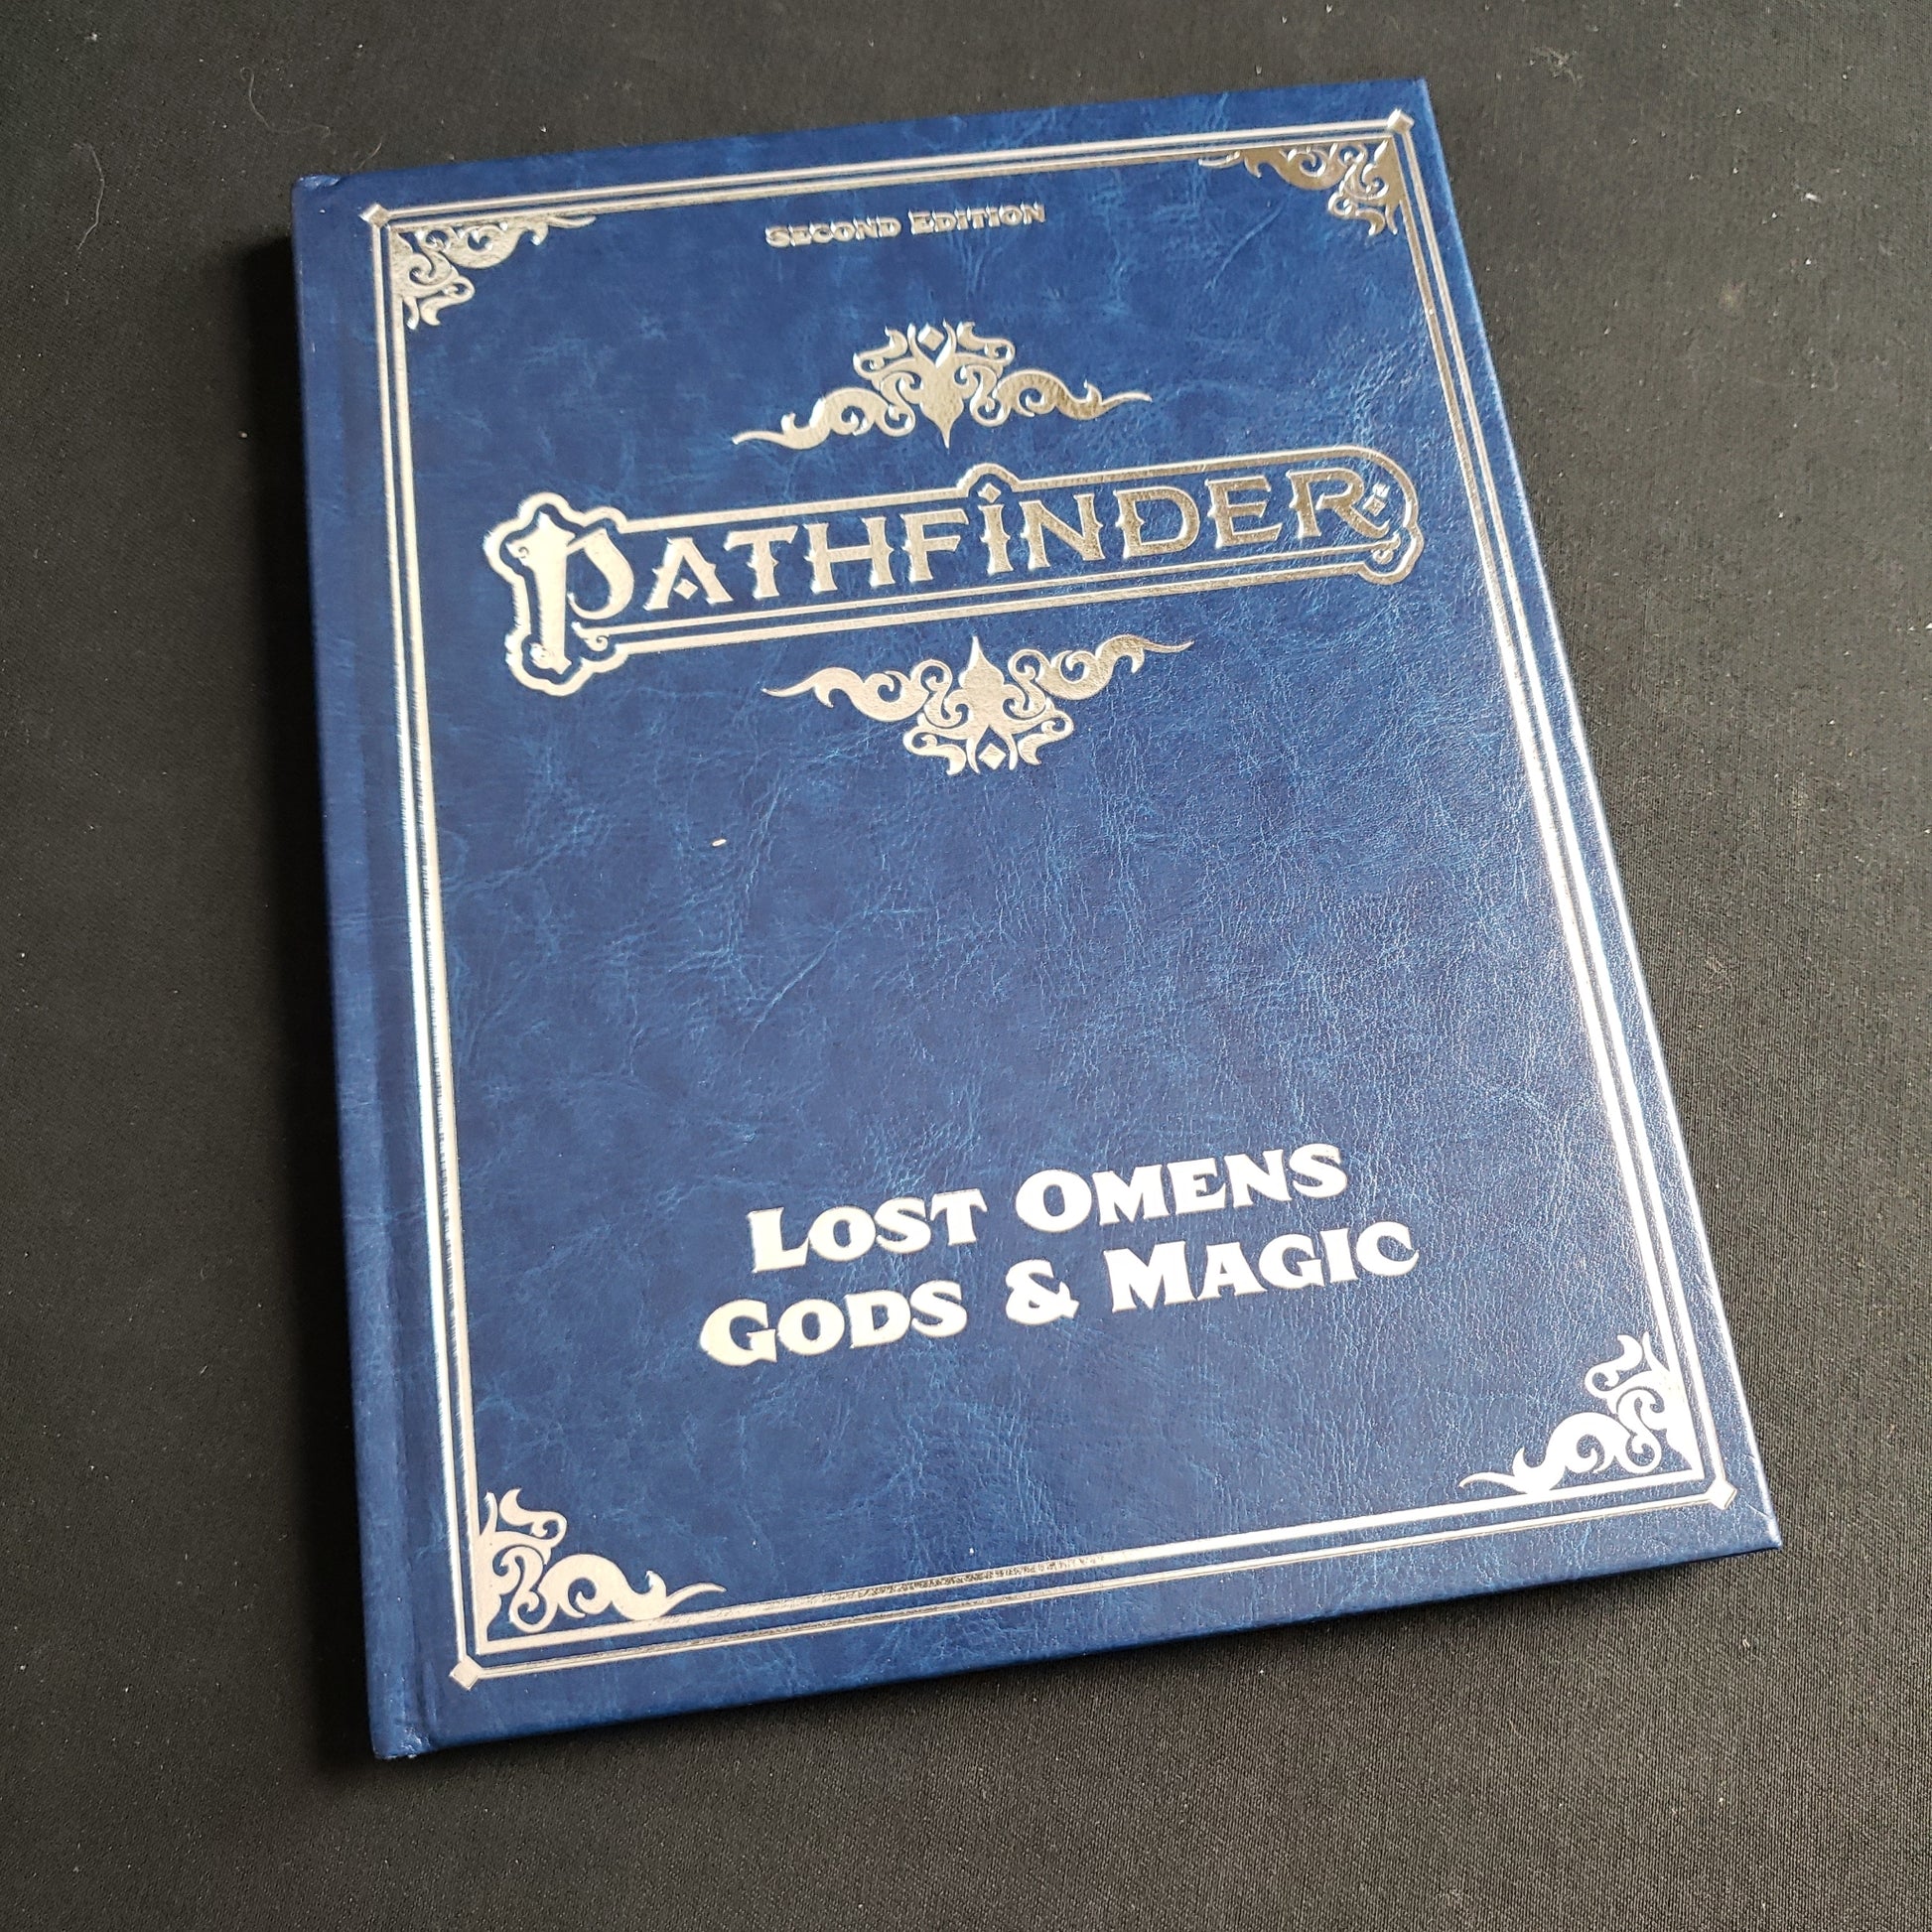 Image shows the front cover of the special edition Lost Omens: Gods & Magic book for the Pathfinder Second Edition roleplaying game